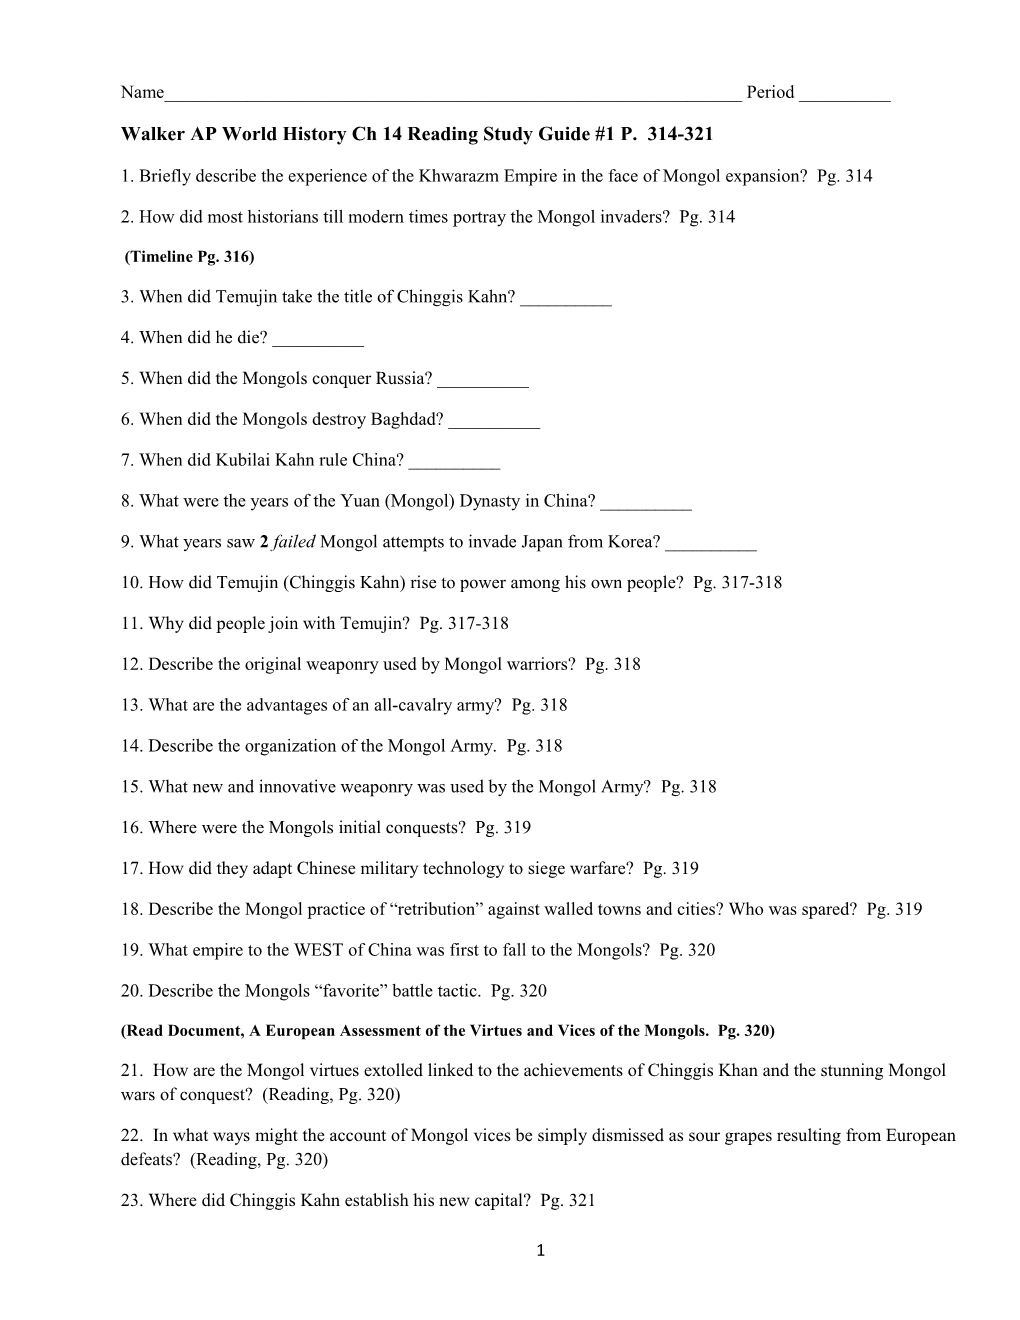 Walker AP World History Ch 14 Reading Study Guide #1 P. 314-321